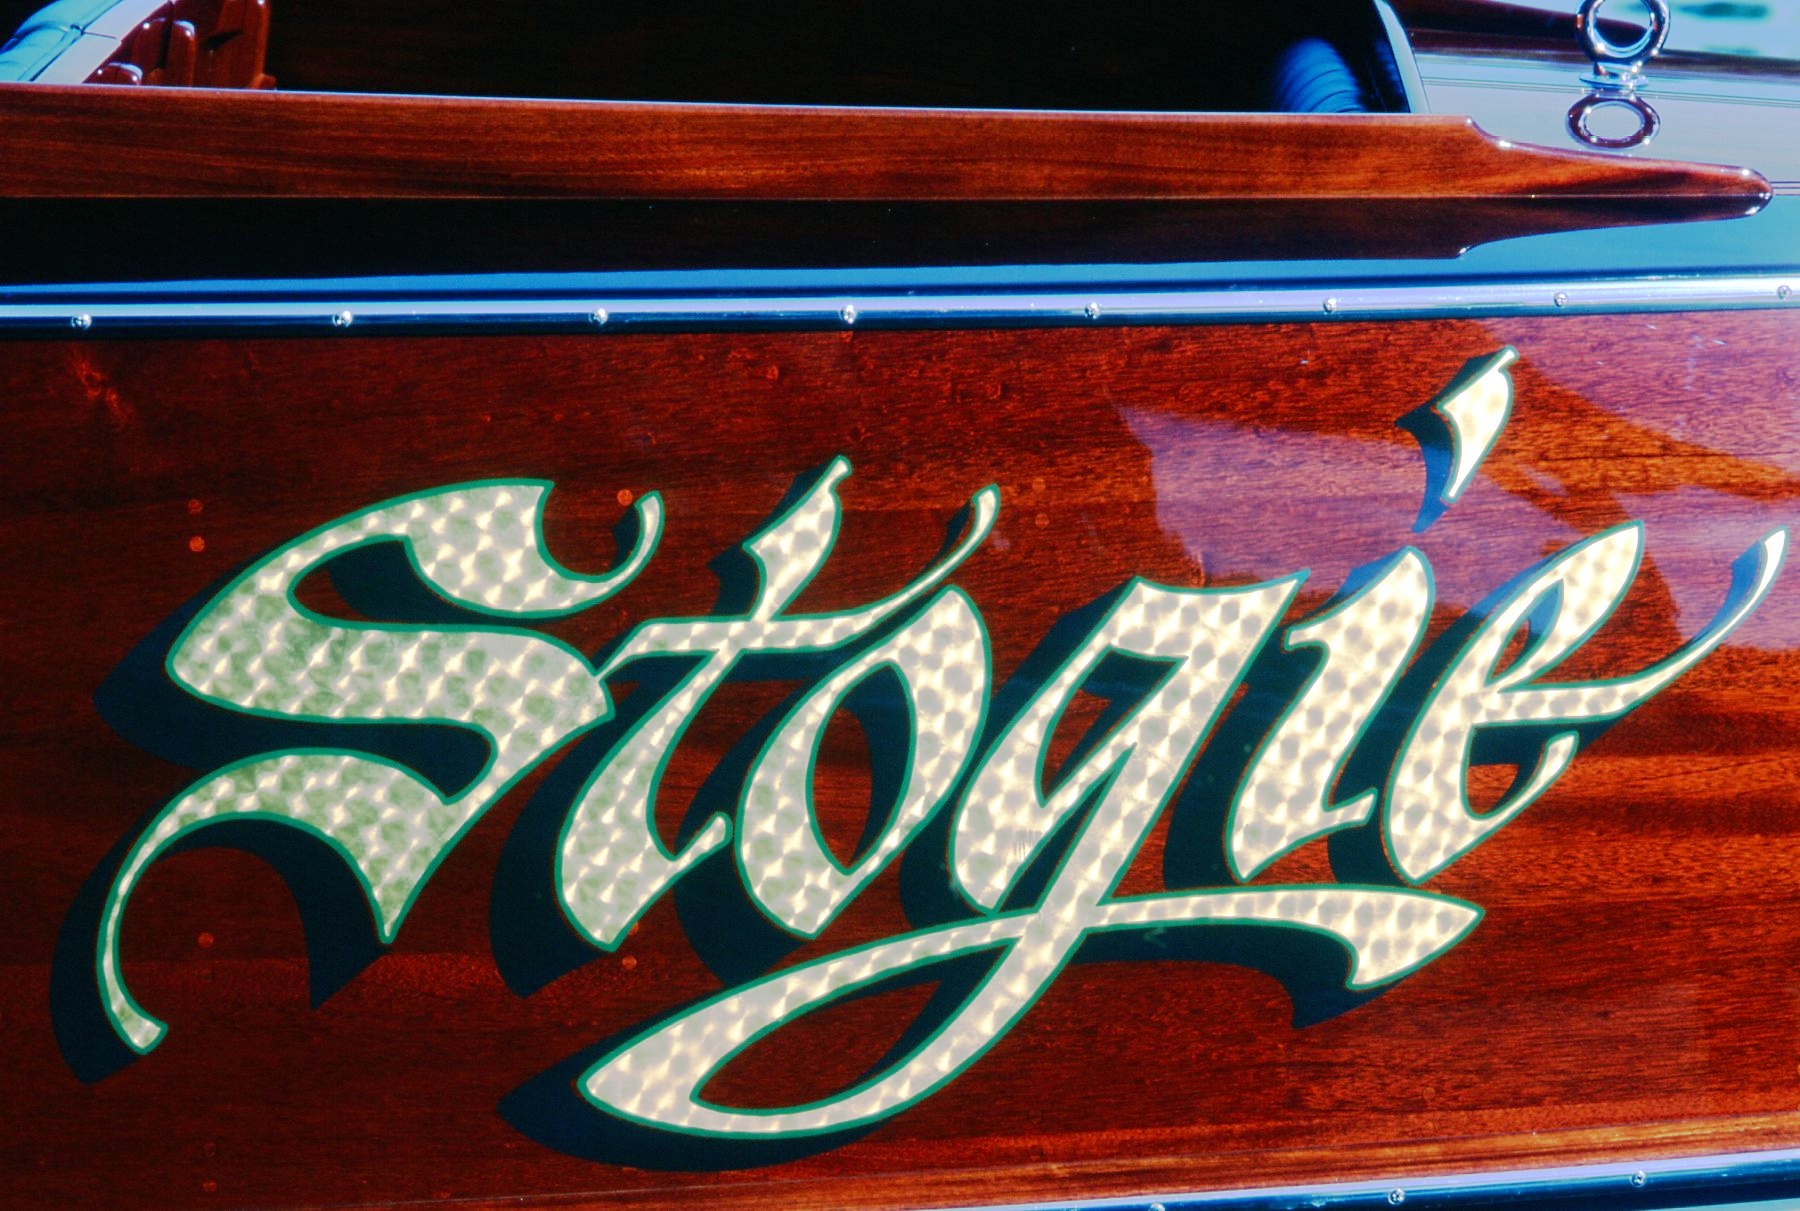 Hand painted name on Stogie